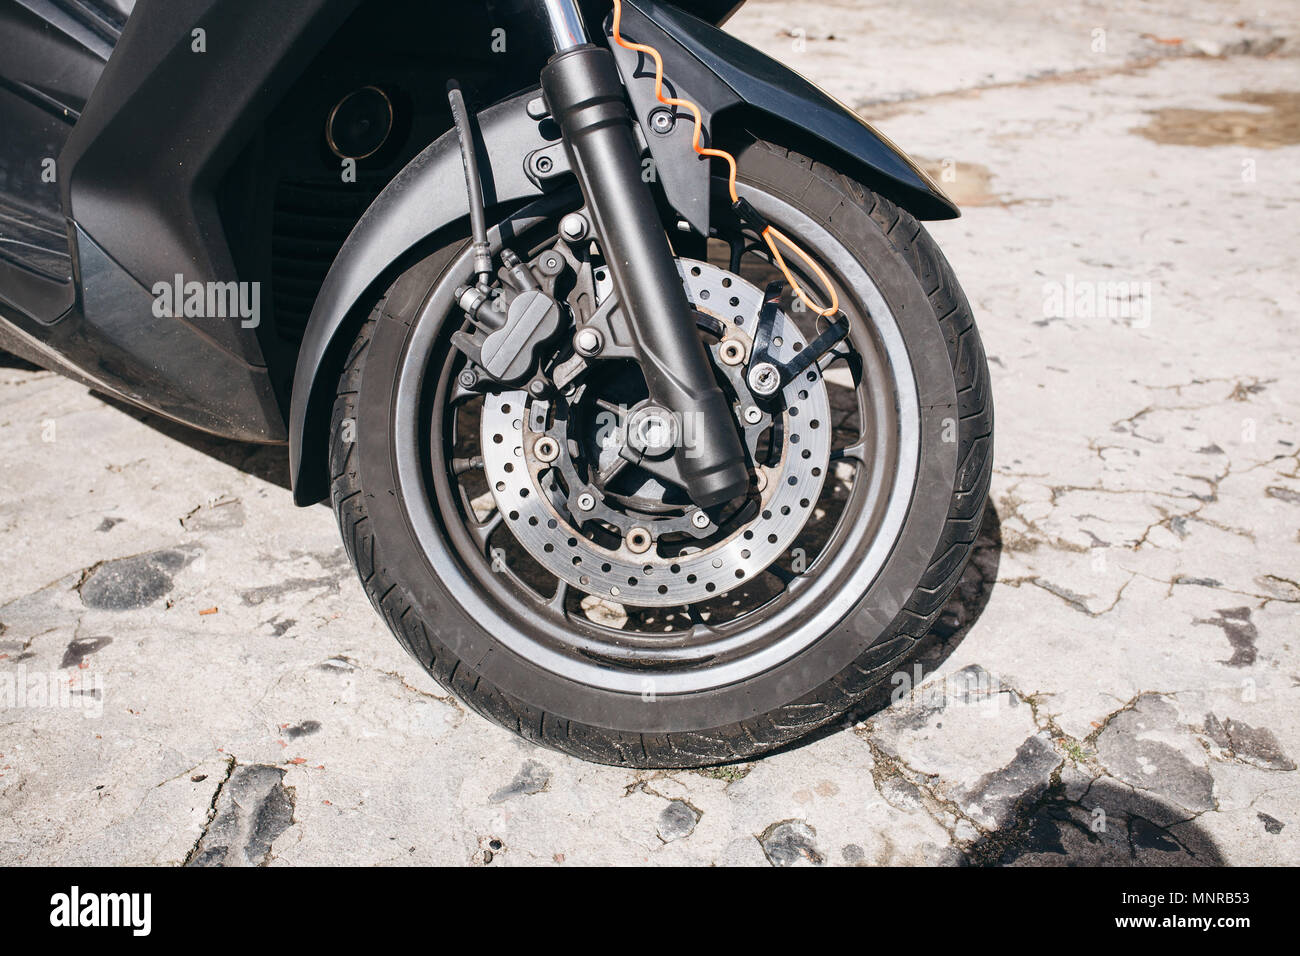 Wheel of motorcycle or scooter or moped. Autotire or tire and design of wheel of motorcycle. Brake system and spare parts for bike Stock Photo